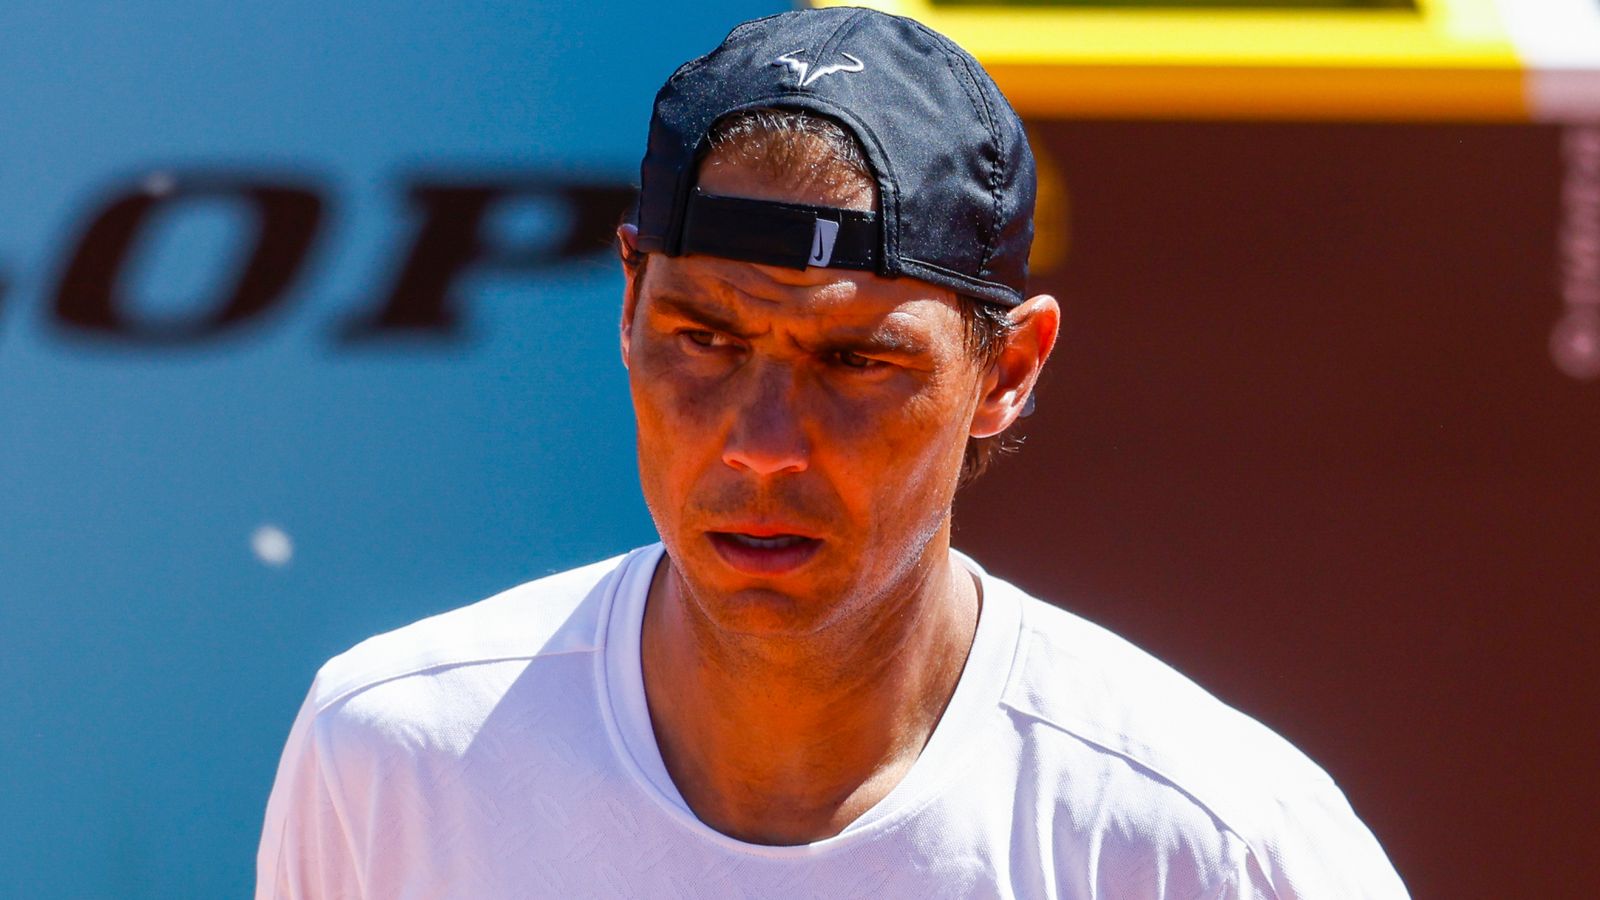 Rafael Nadal uncertain over French Open and ‘wouldn’t play today’ as 14-time winner continues return from injury